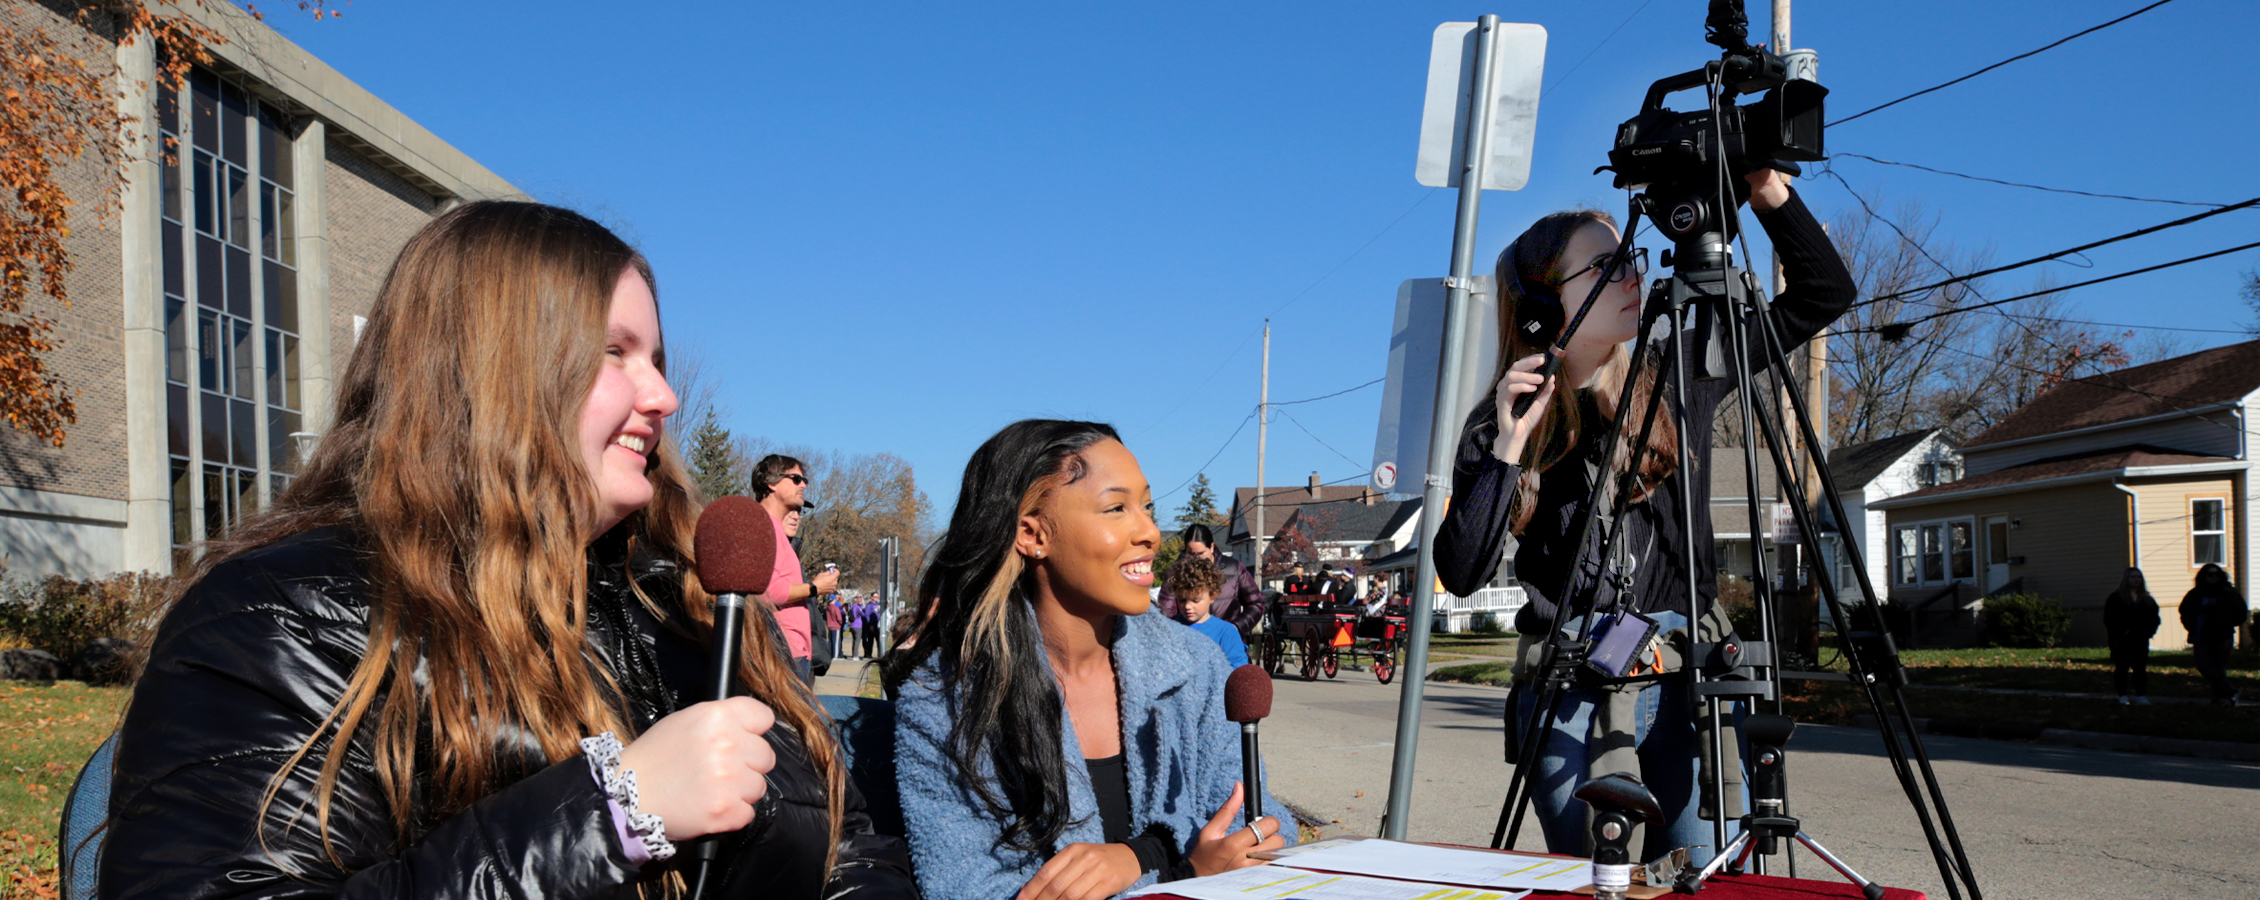 Two students hold microphones and one student works a video camera during a Homecoming parade.